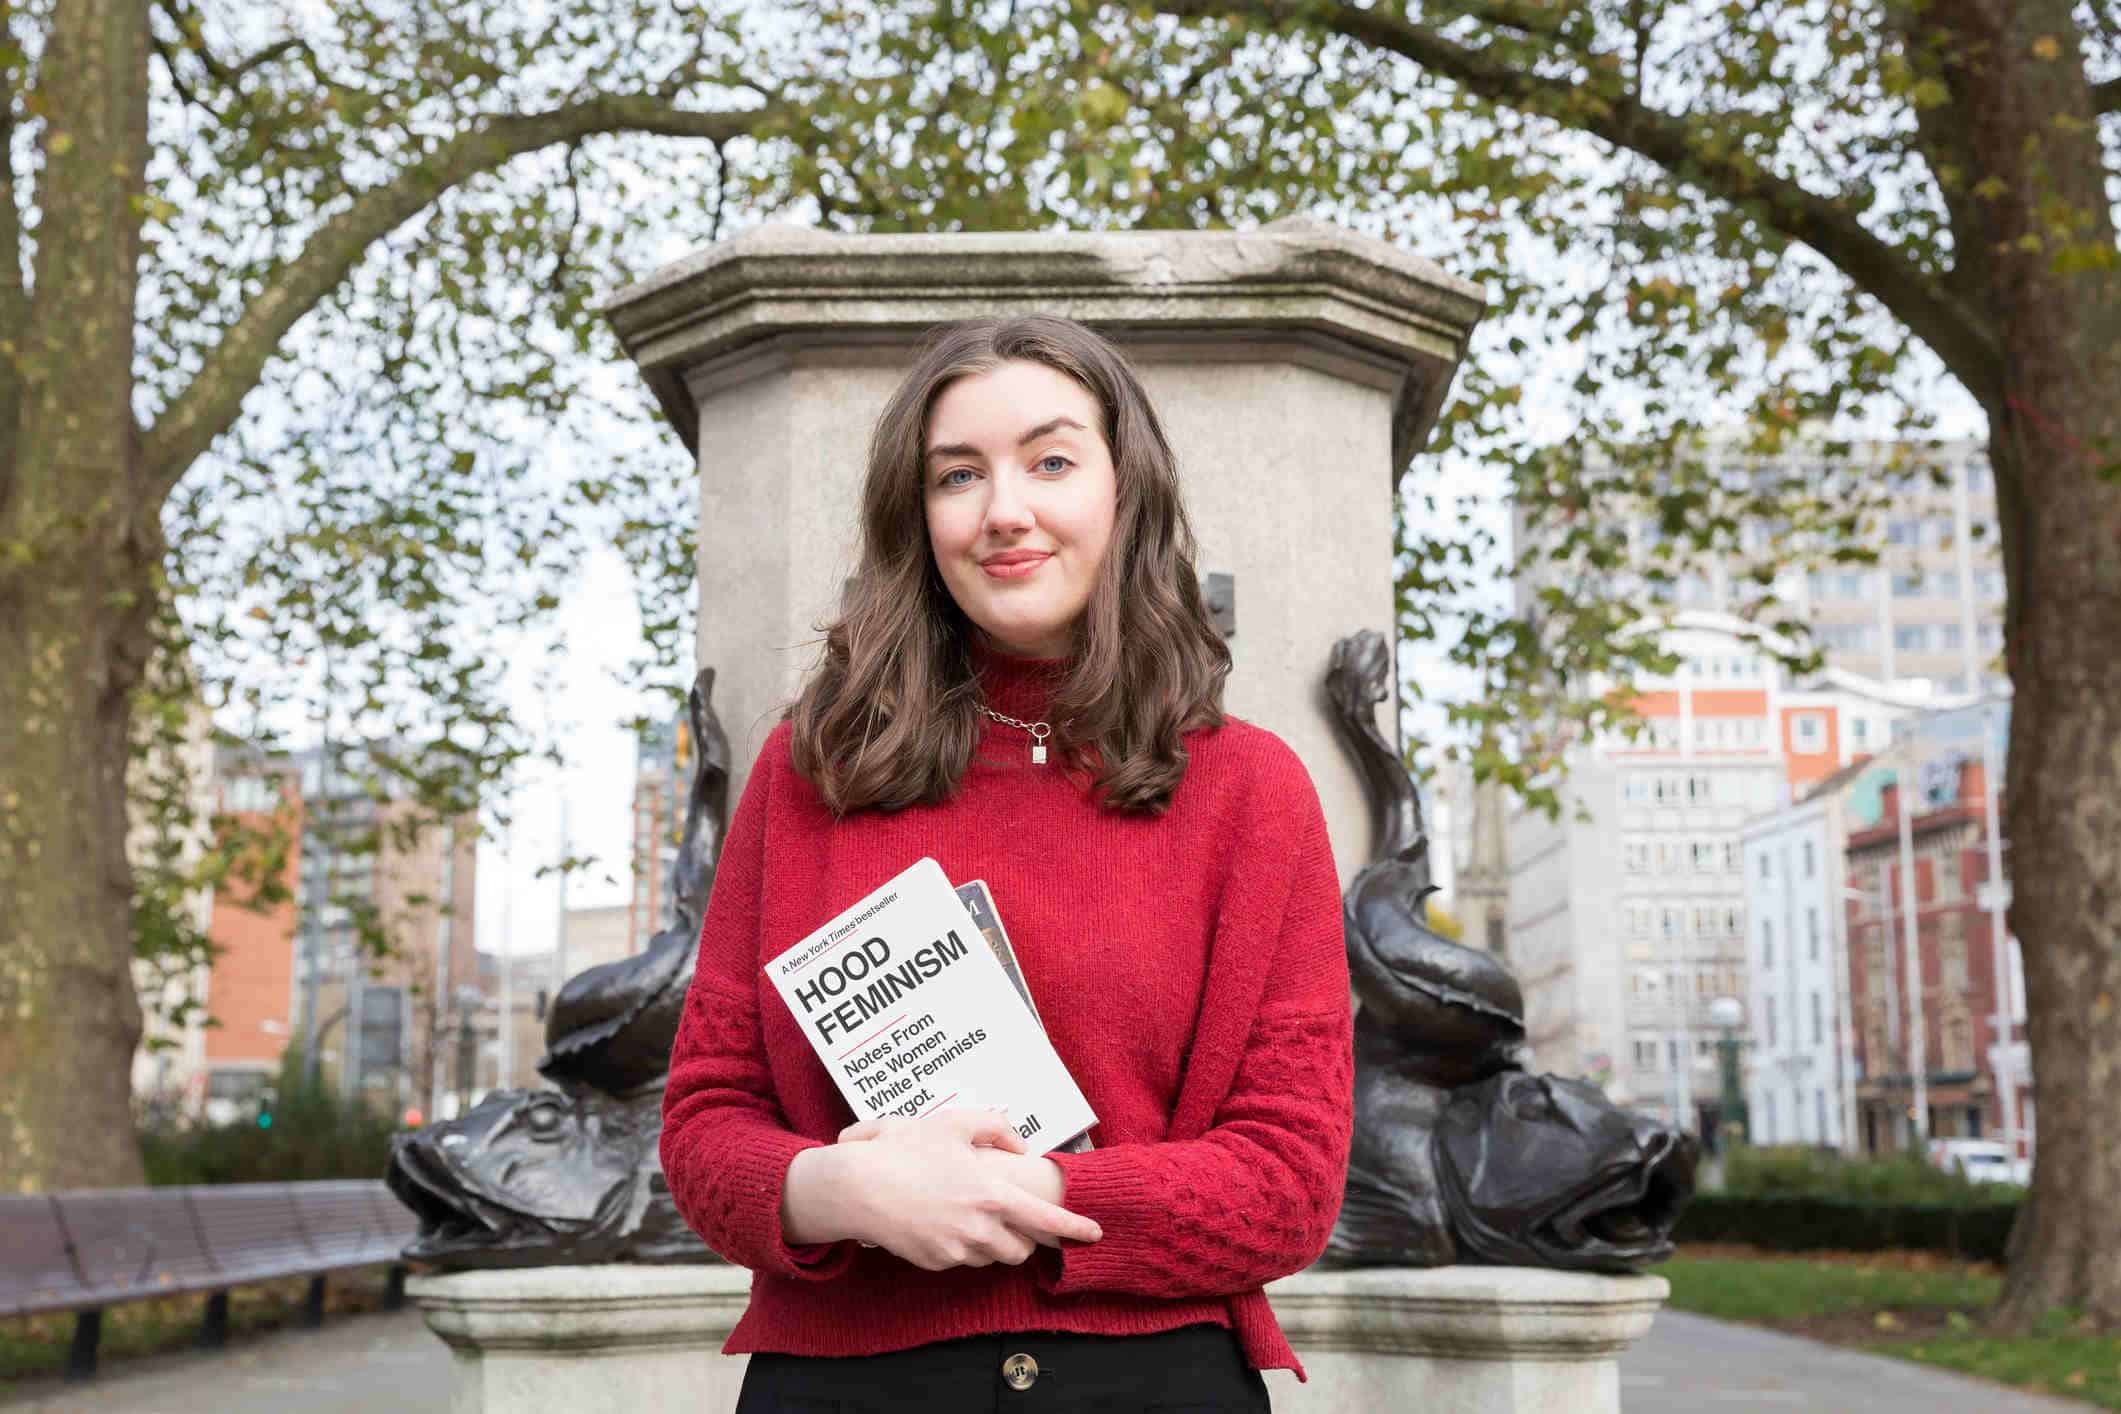 Miranda stands in front of an empty plinth. She is carrying to books, one is titled "Hood Feminism".